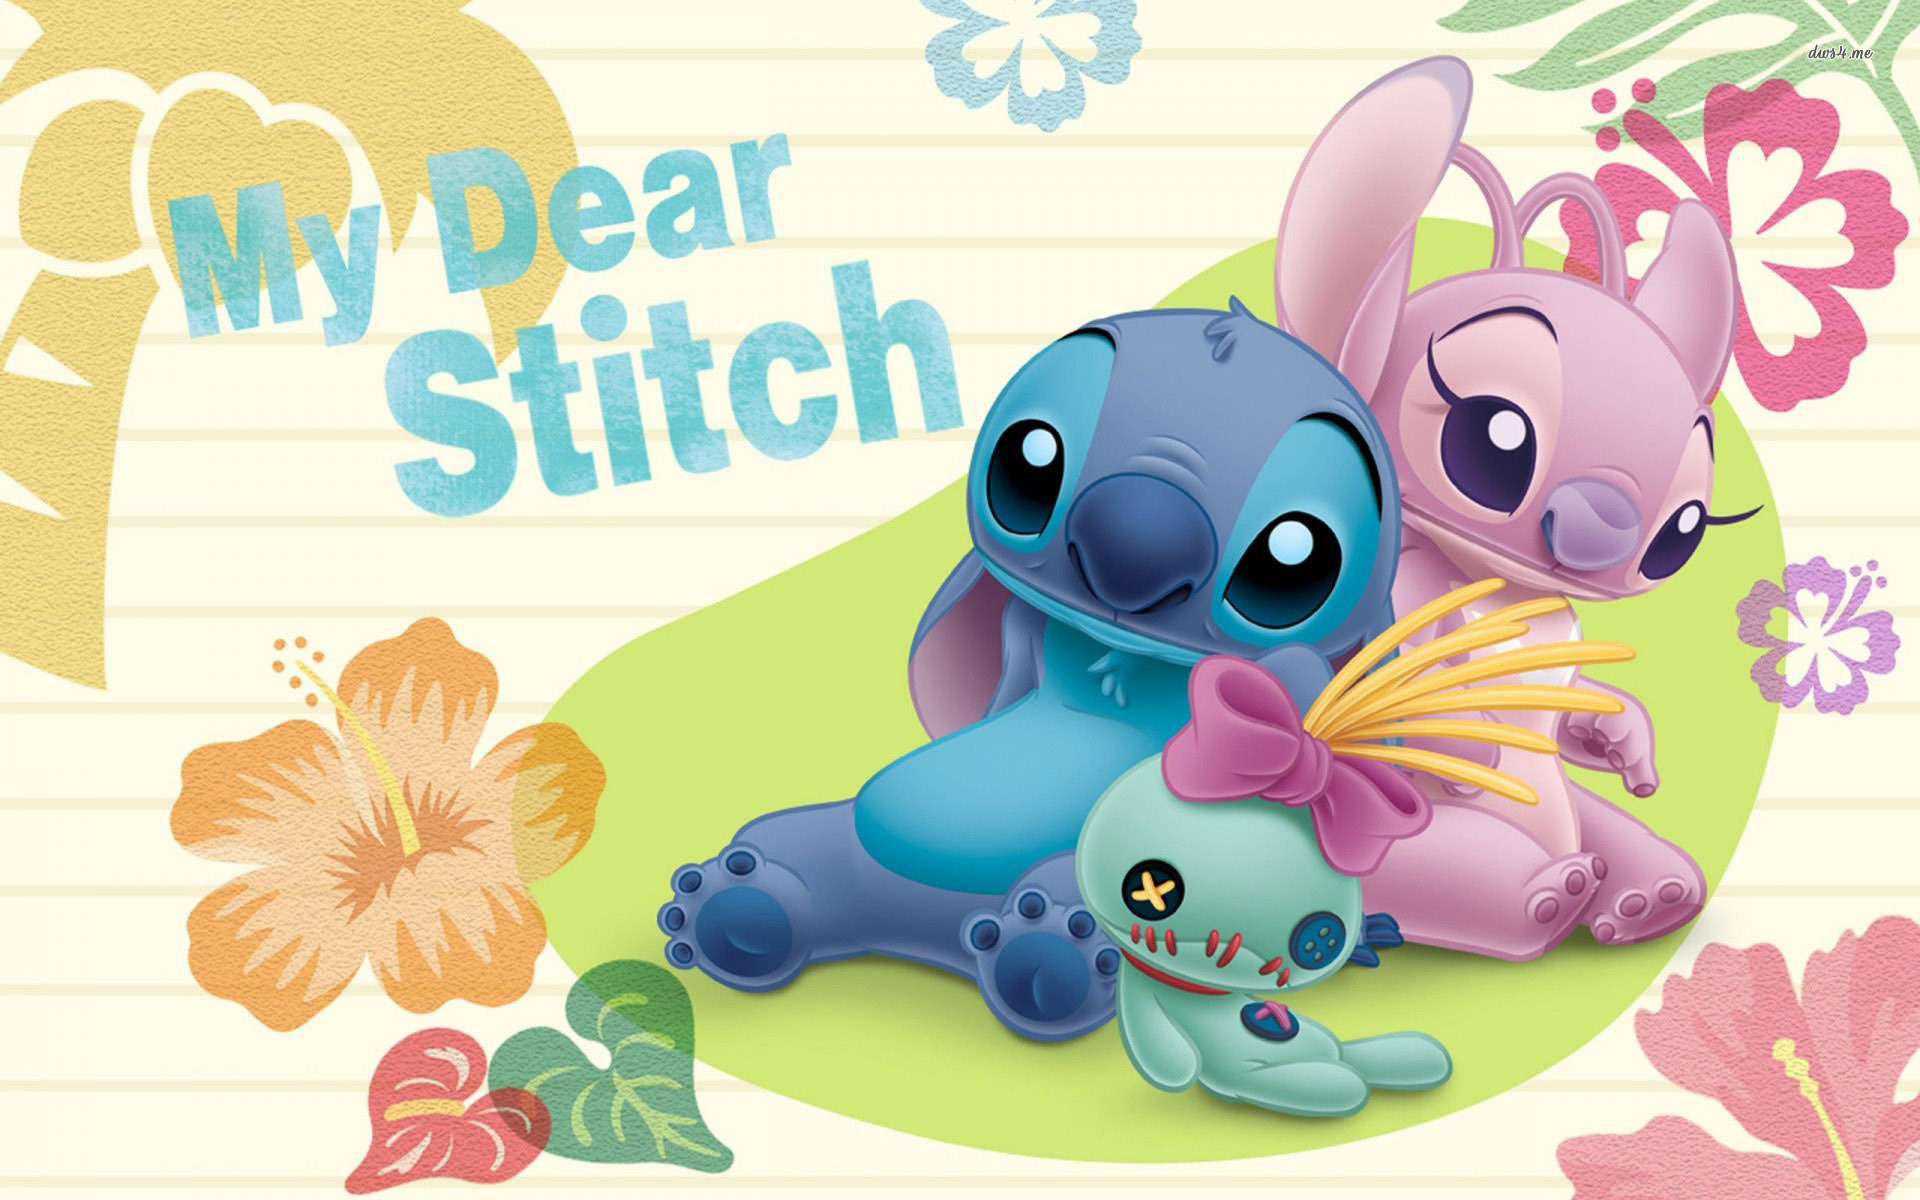 Lilo and stitch Computer Wallpapers, Desktop Backgrounds